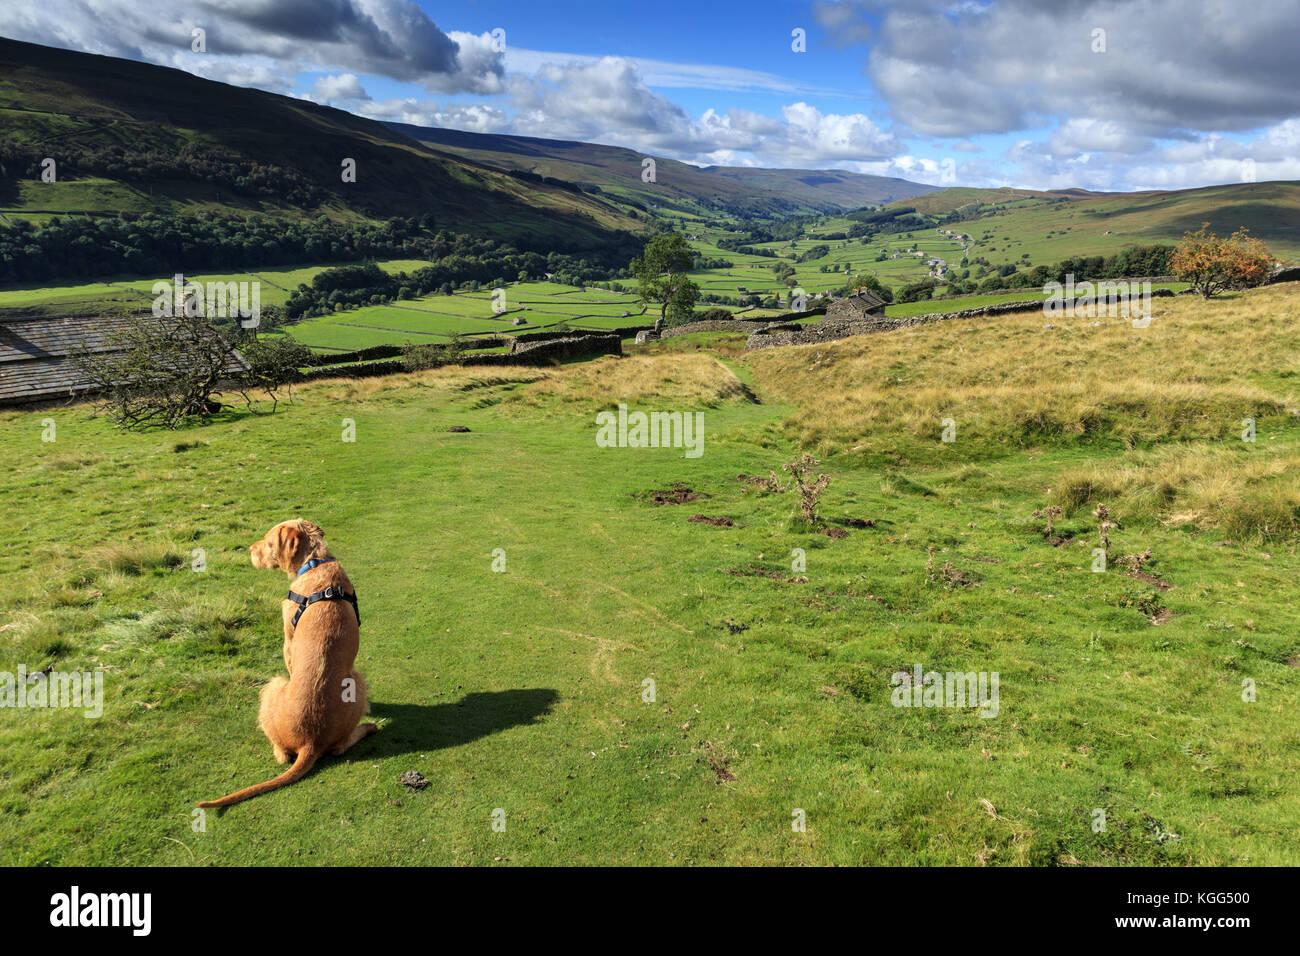 Dog looking west towards Gunnerside and Great Shunner Fell in the far distance. North Yorkshire, England, September 2017 Stock Photo